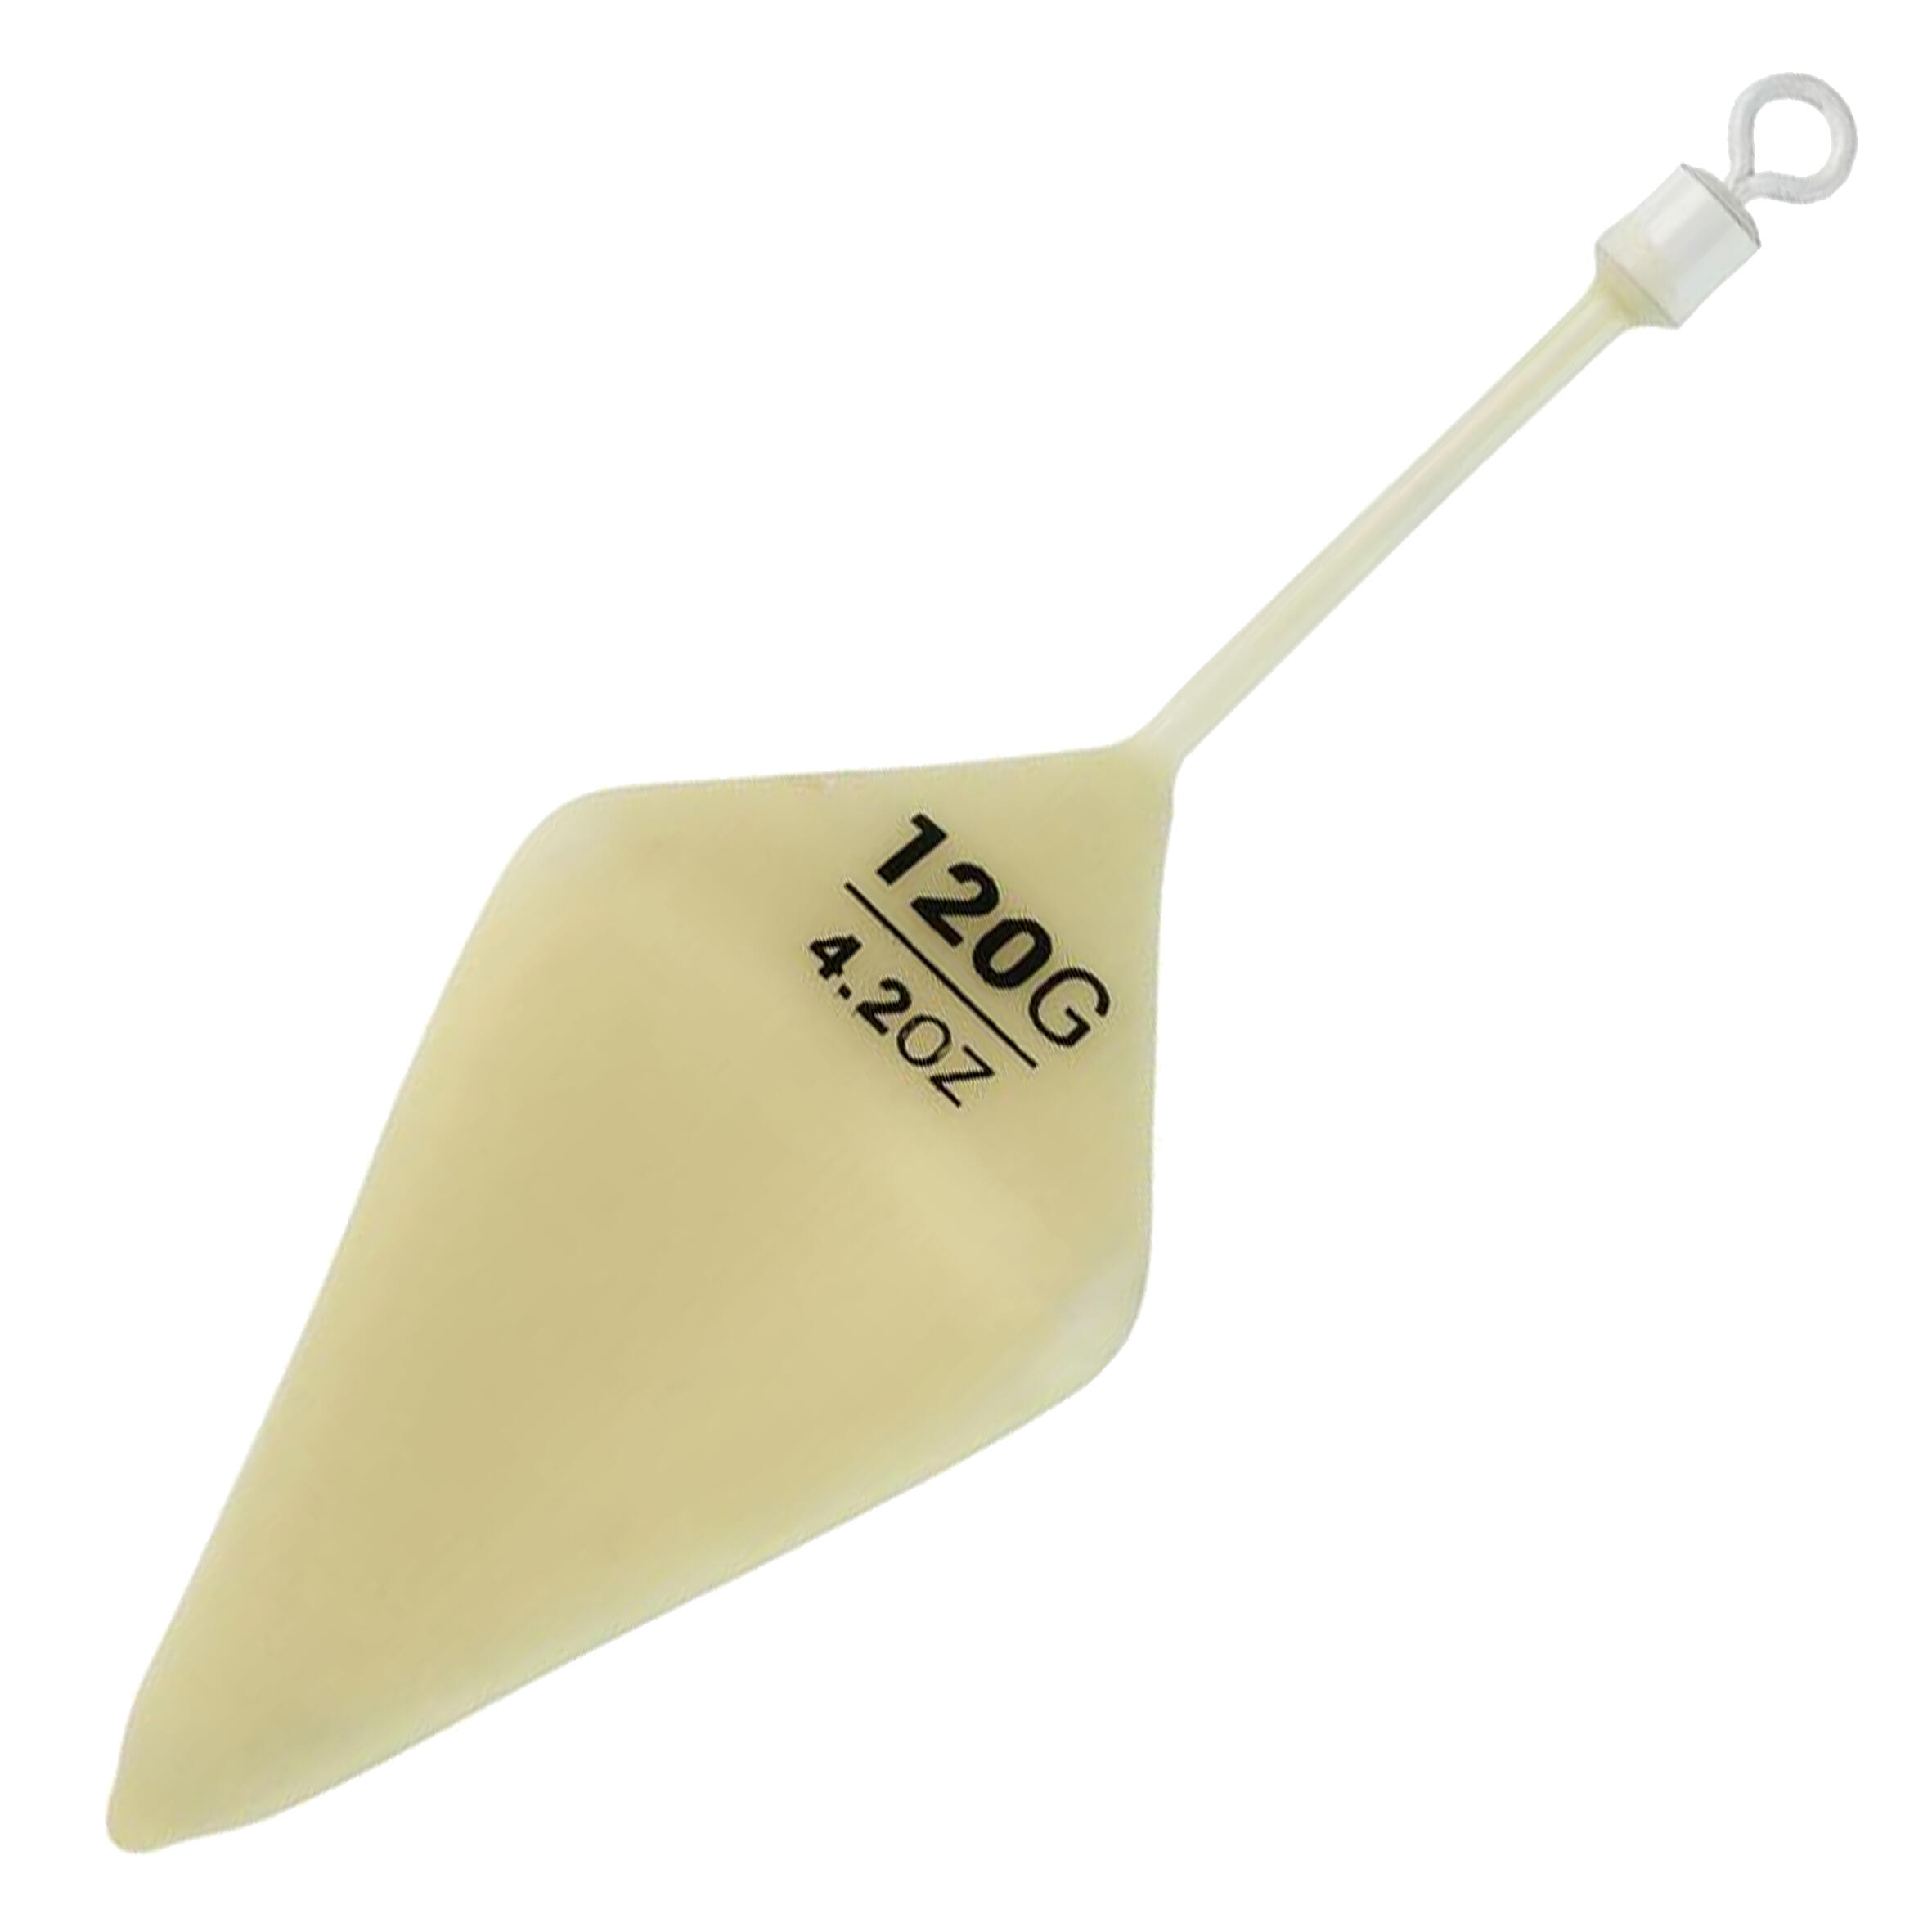 Glow in the Dark Silicone Pyramid Sinker for surfcasting 1/4